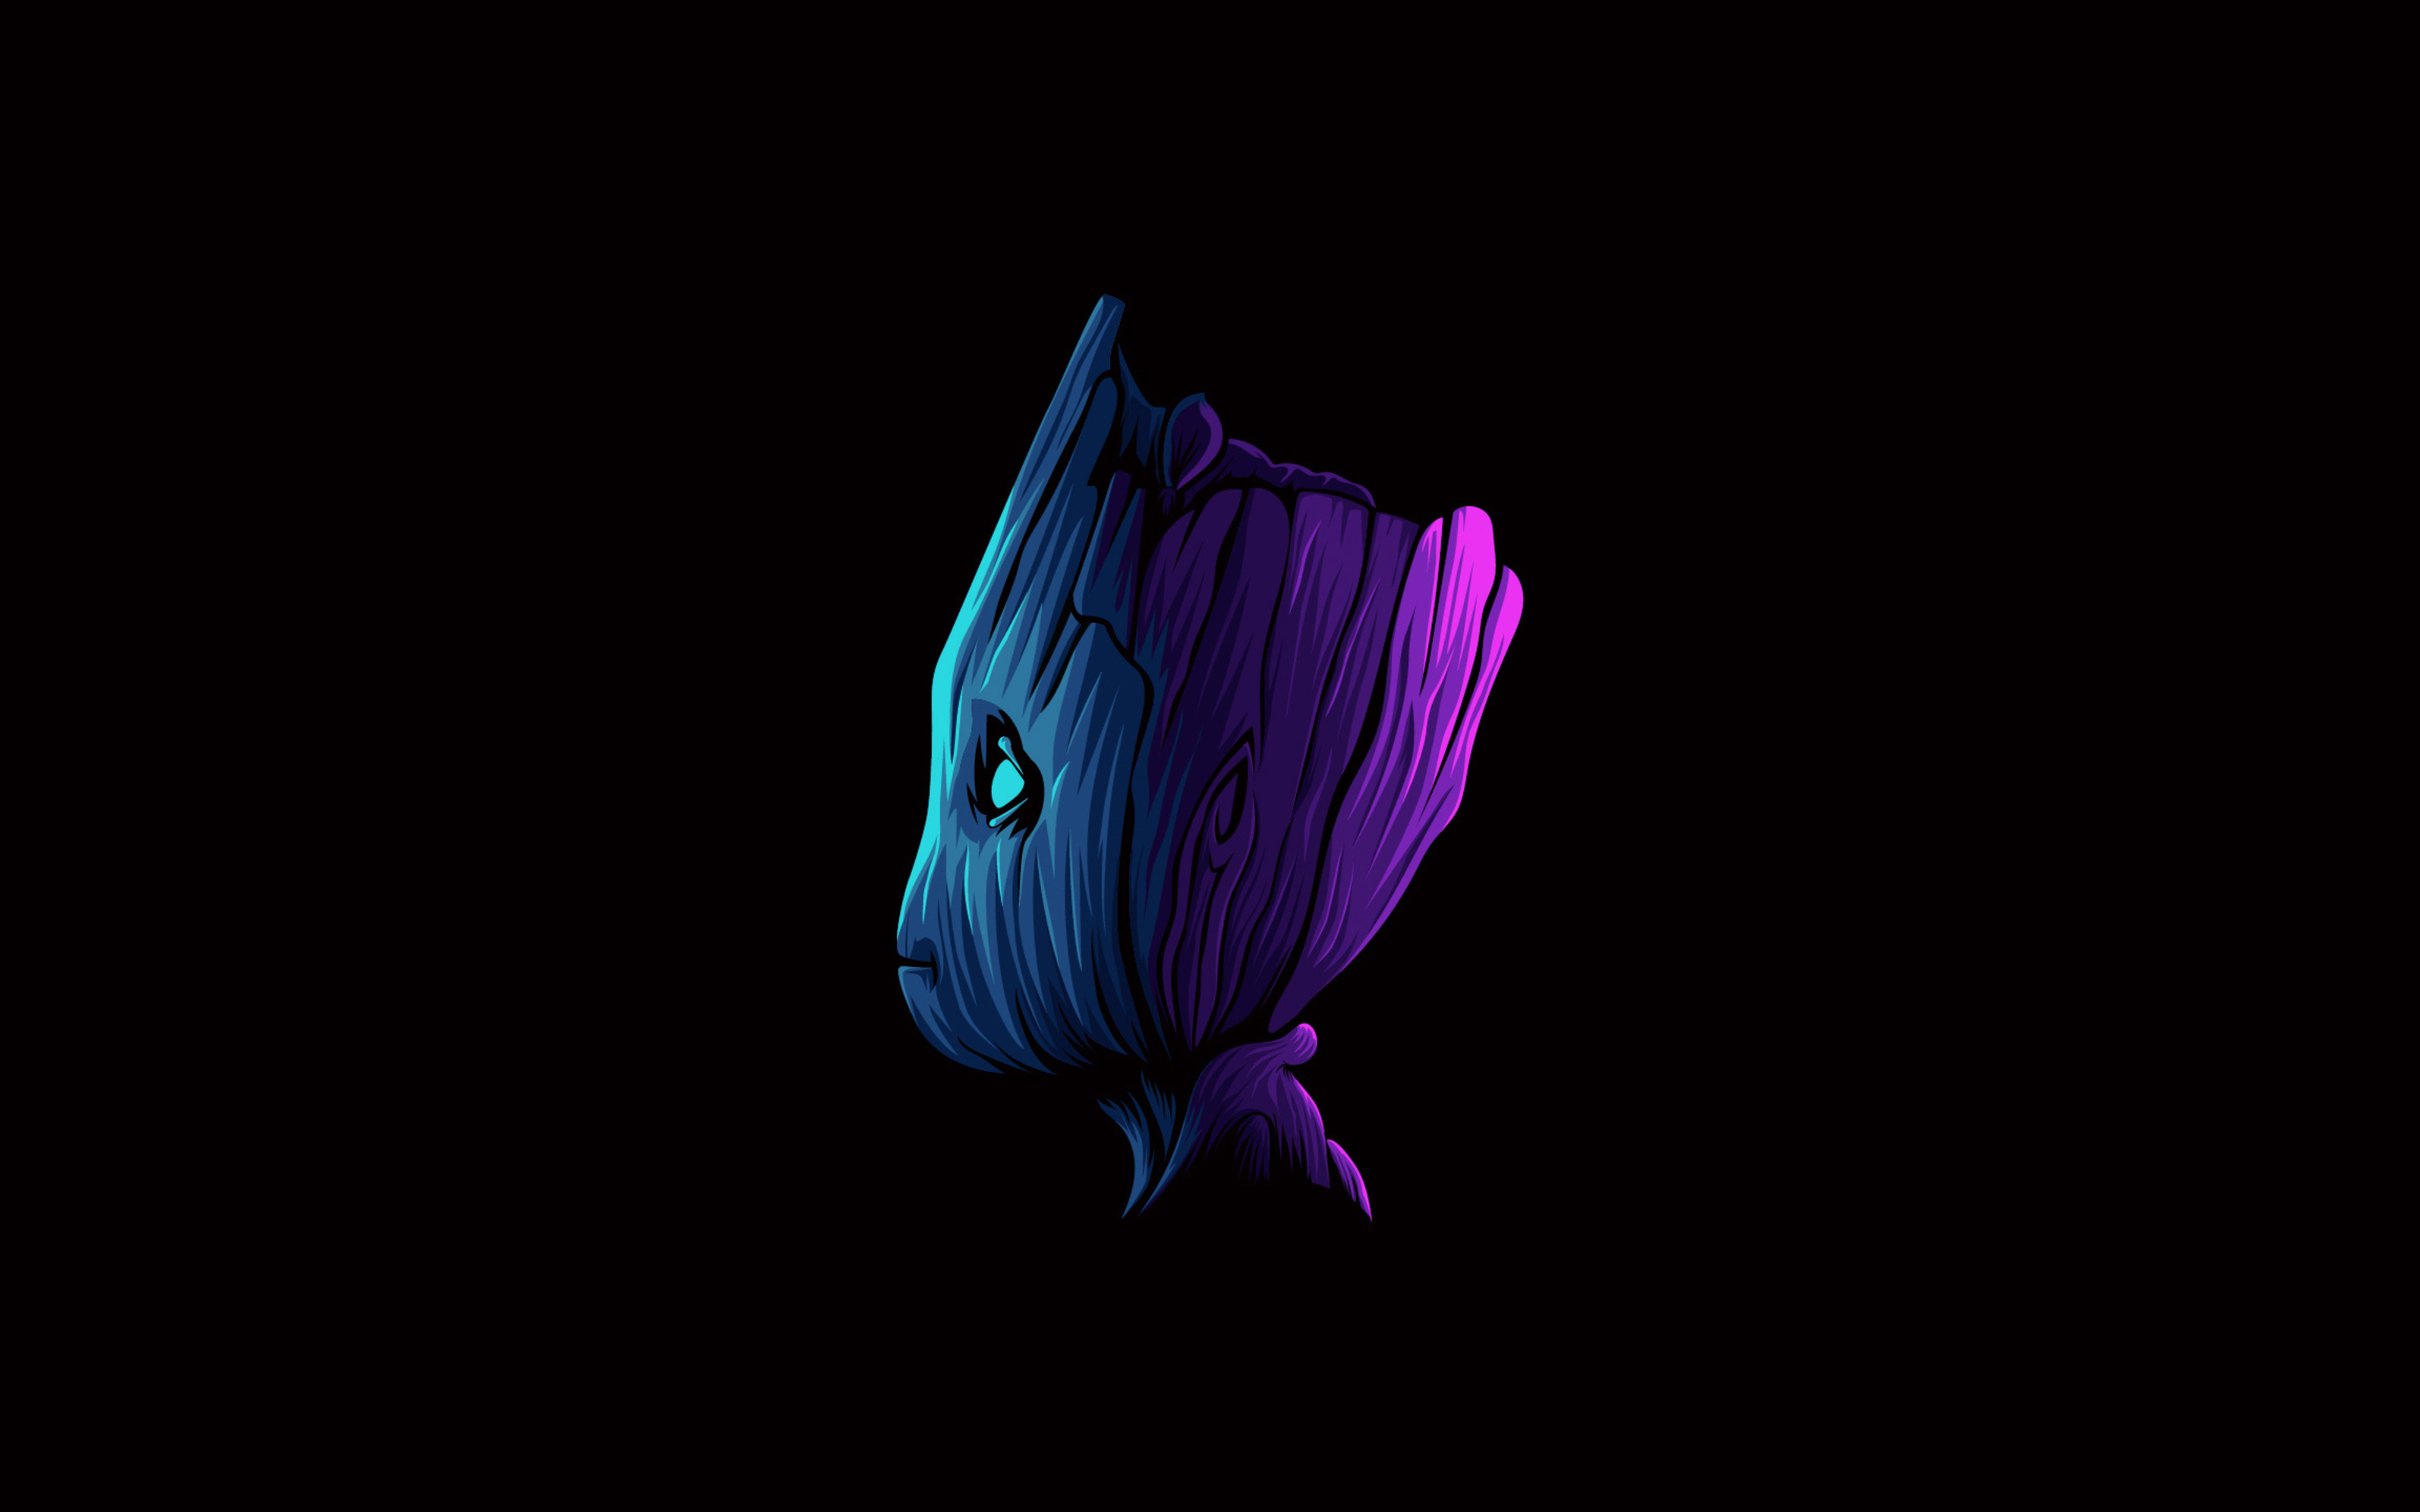 Groot Marvel Cinematic Universe Guardians Of The Galaxy Superhero 3840x2400